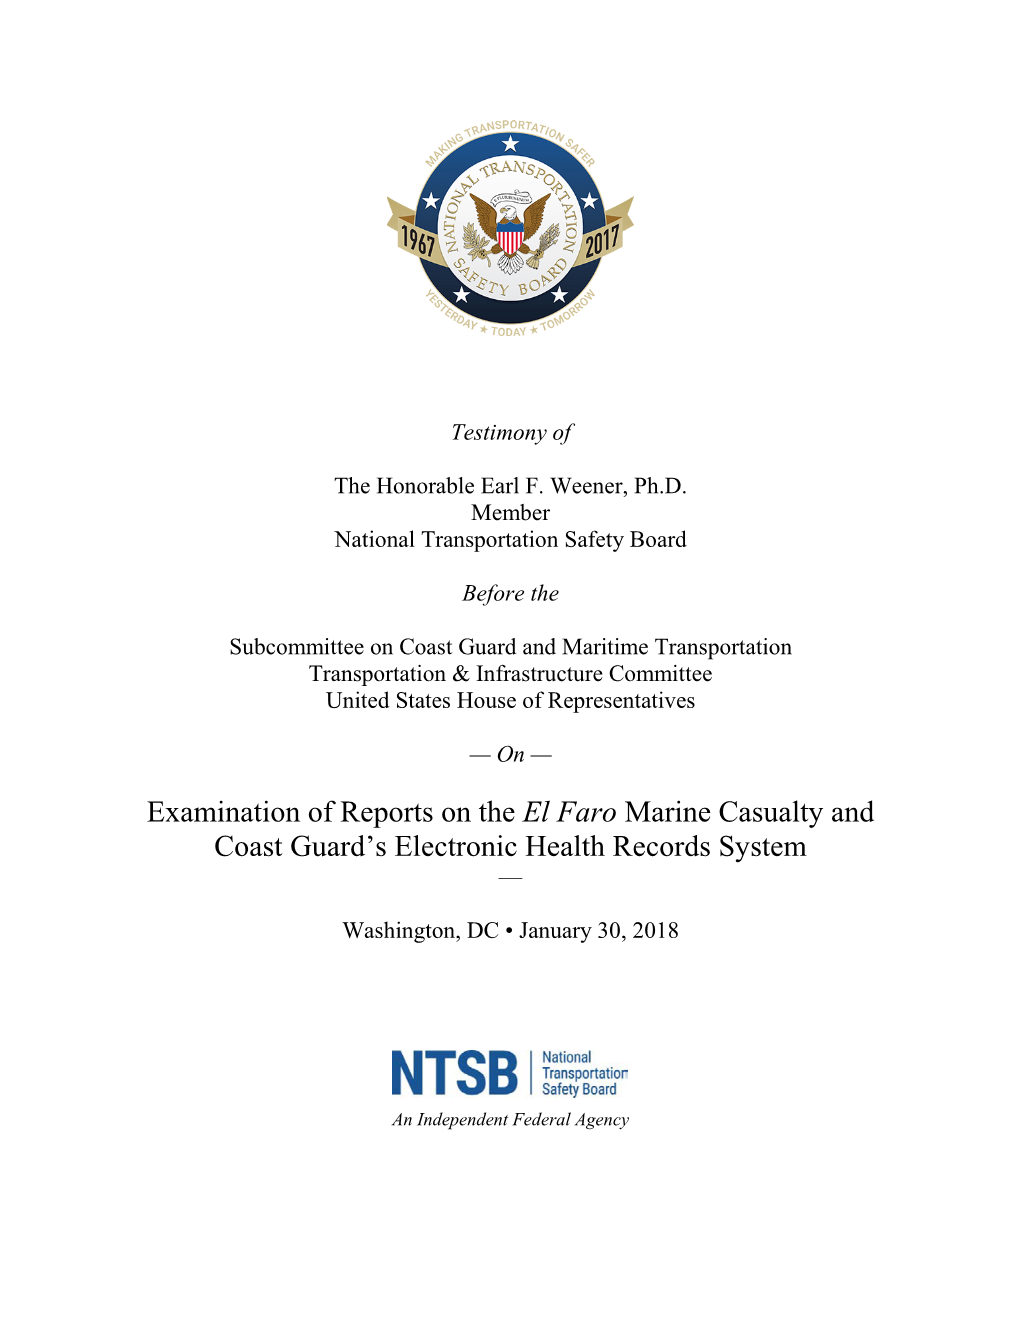 Examination of Reports on the El Faro Marine Casualty and Coast Guard's